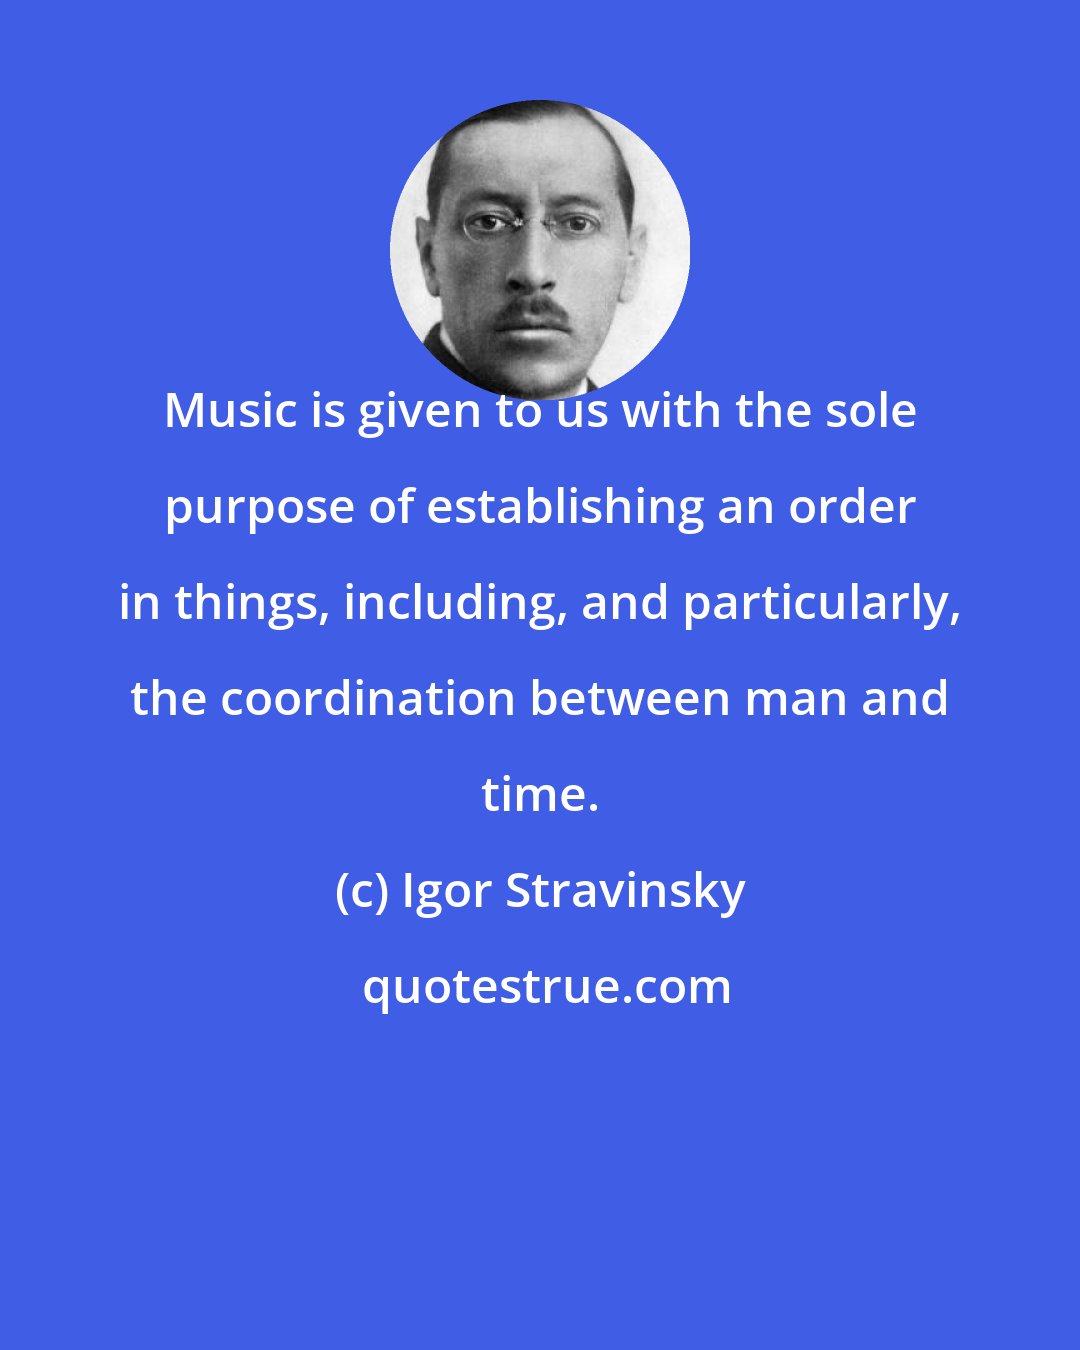 Igor Stravinsky: Music is given to us with the sole purpose of establishing an order in things, including, and particularly, the coordination between man and time.